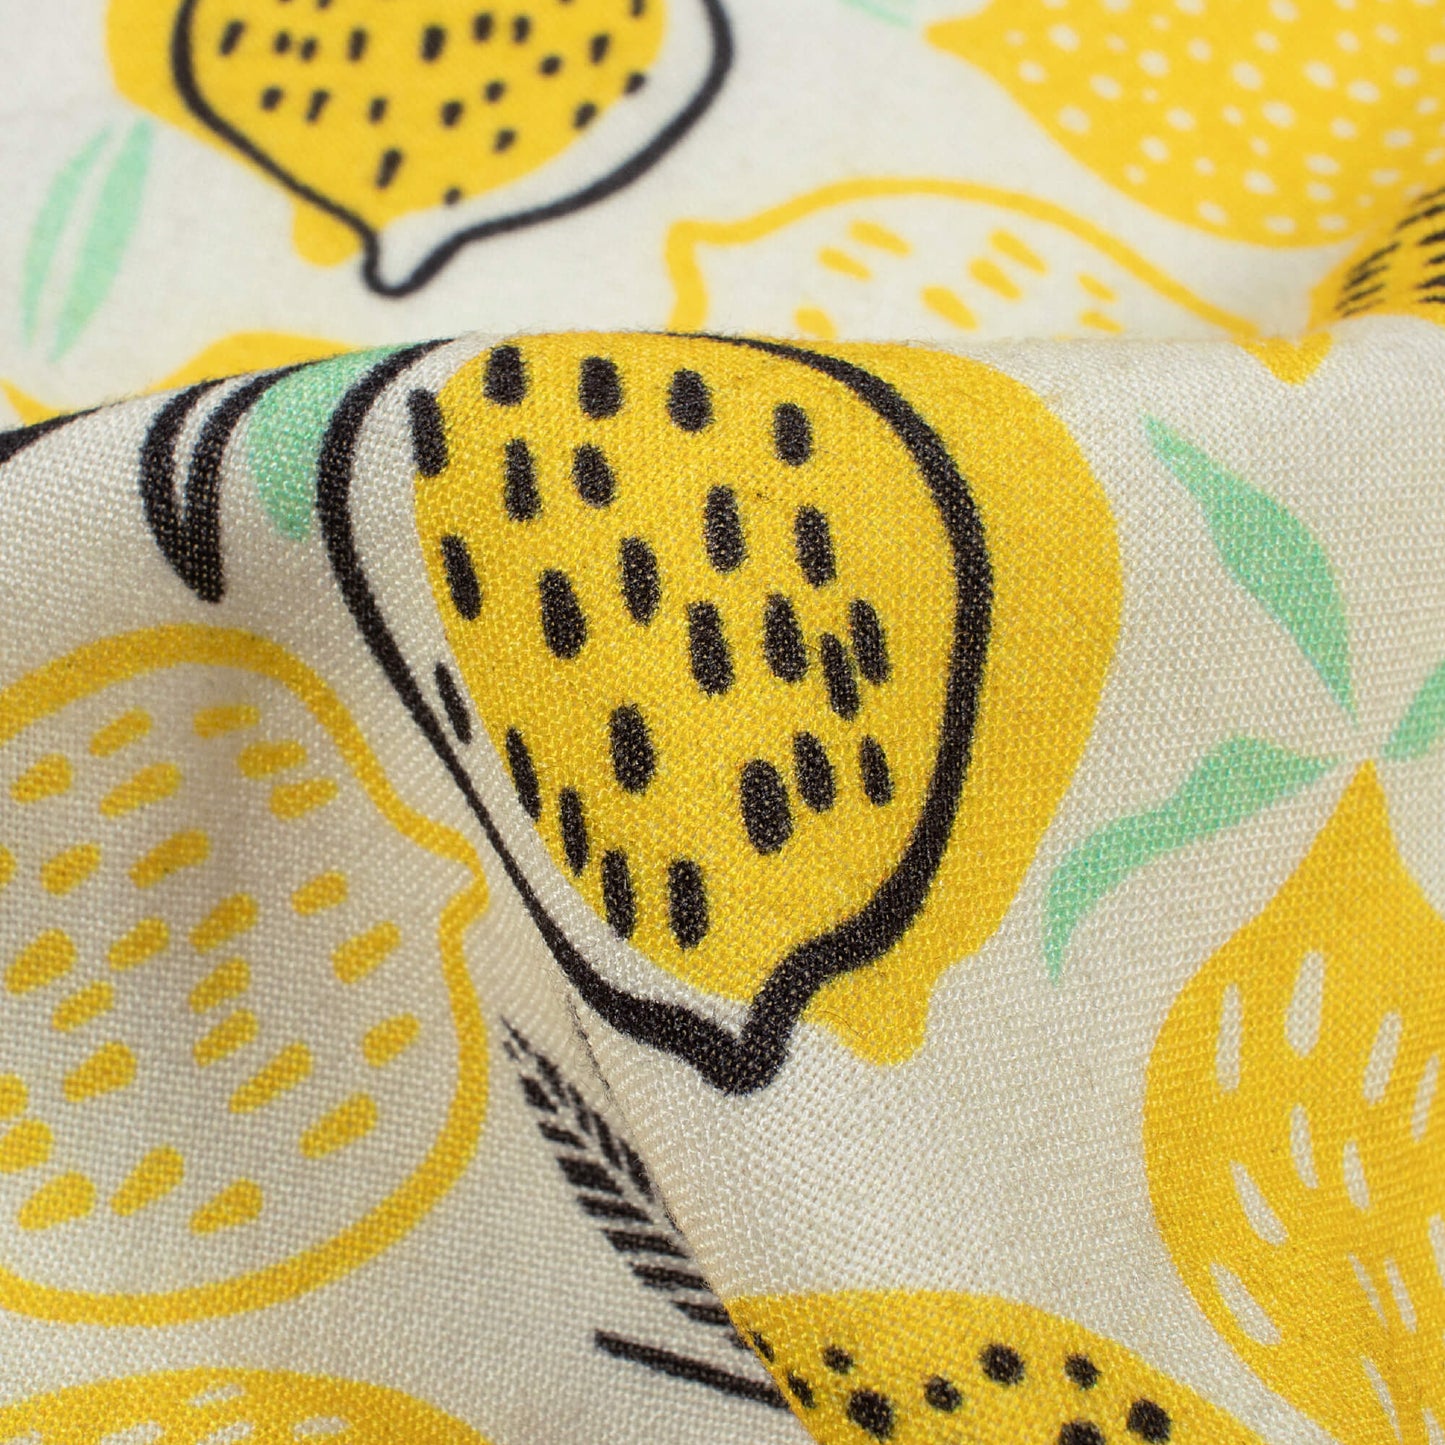 Lemon Yellow And Black Quirky Pattern Digital Print Viscose Rayon Fabric (Width 58 Inches)